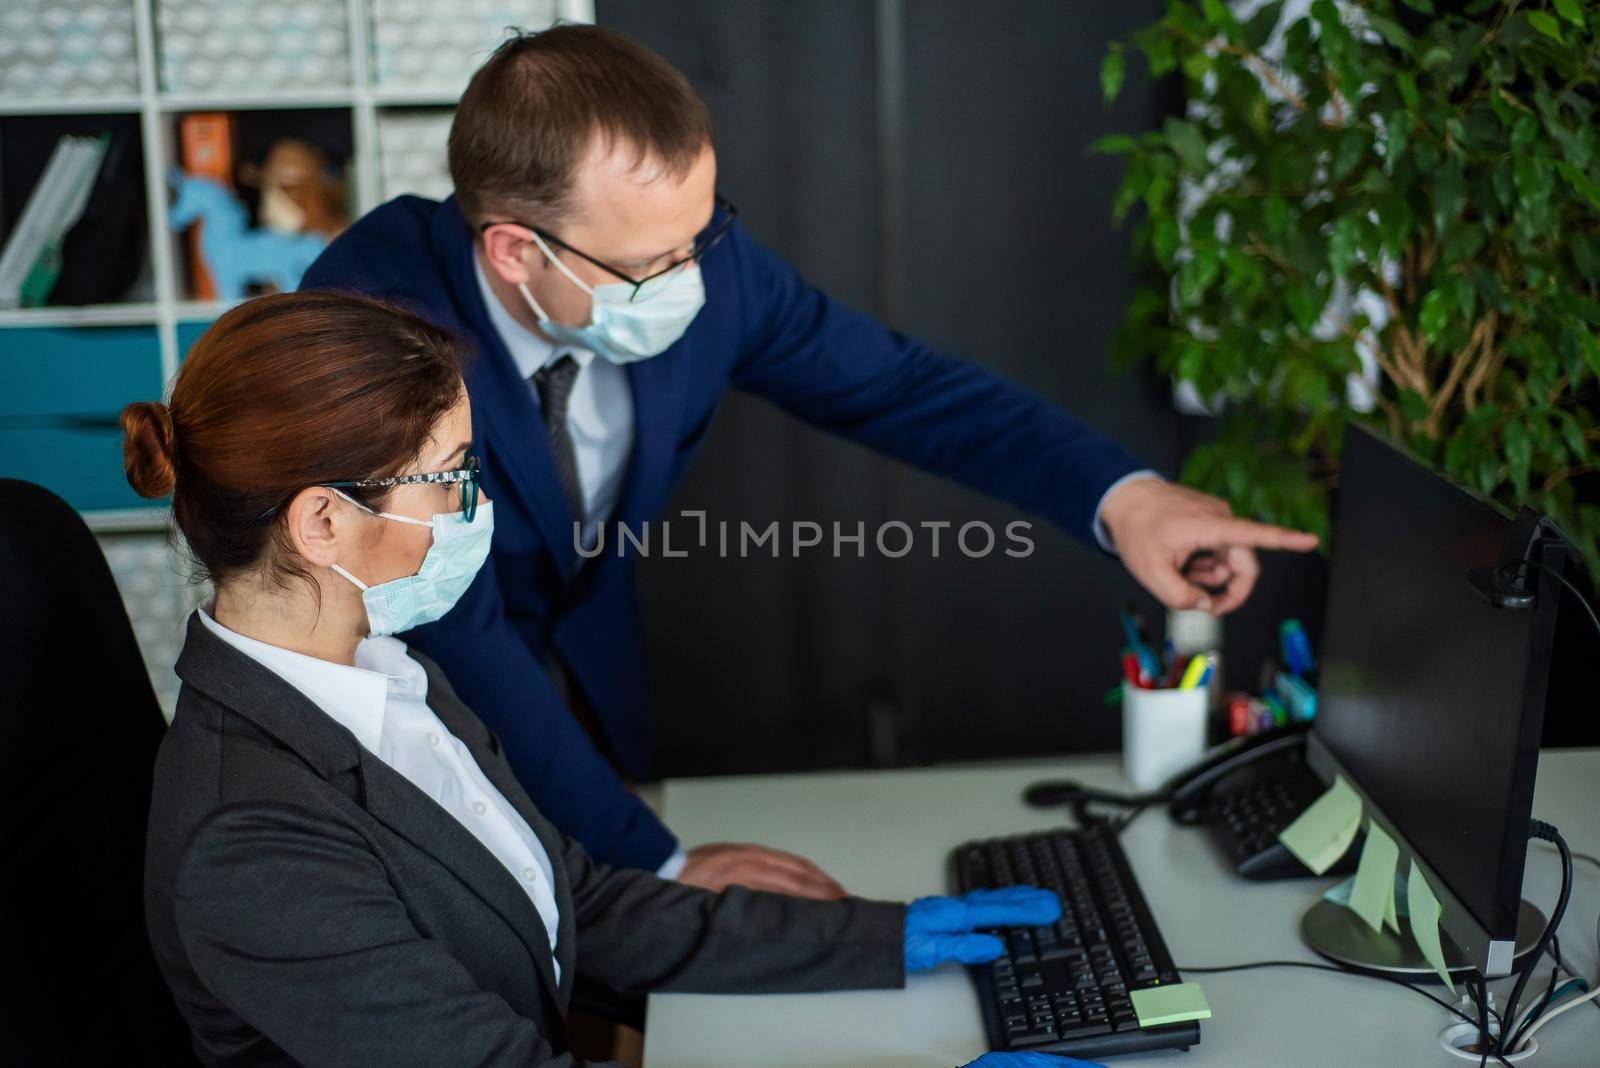 Colleagues in surgical masks in an open office space communicate at the work desk. A male top manager teaches a female intern how to work at a computer. The boss directs the subordinate. by mrwed54